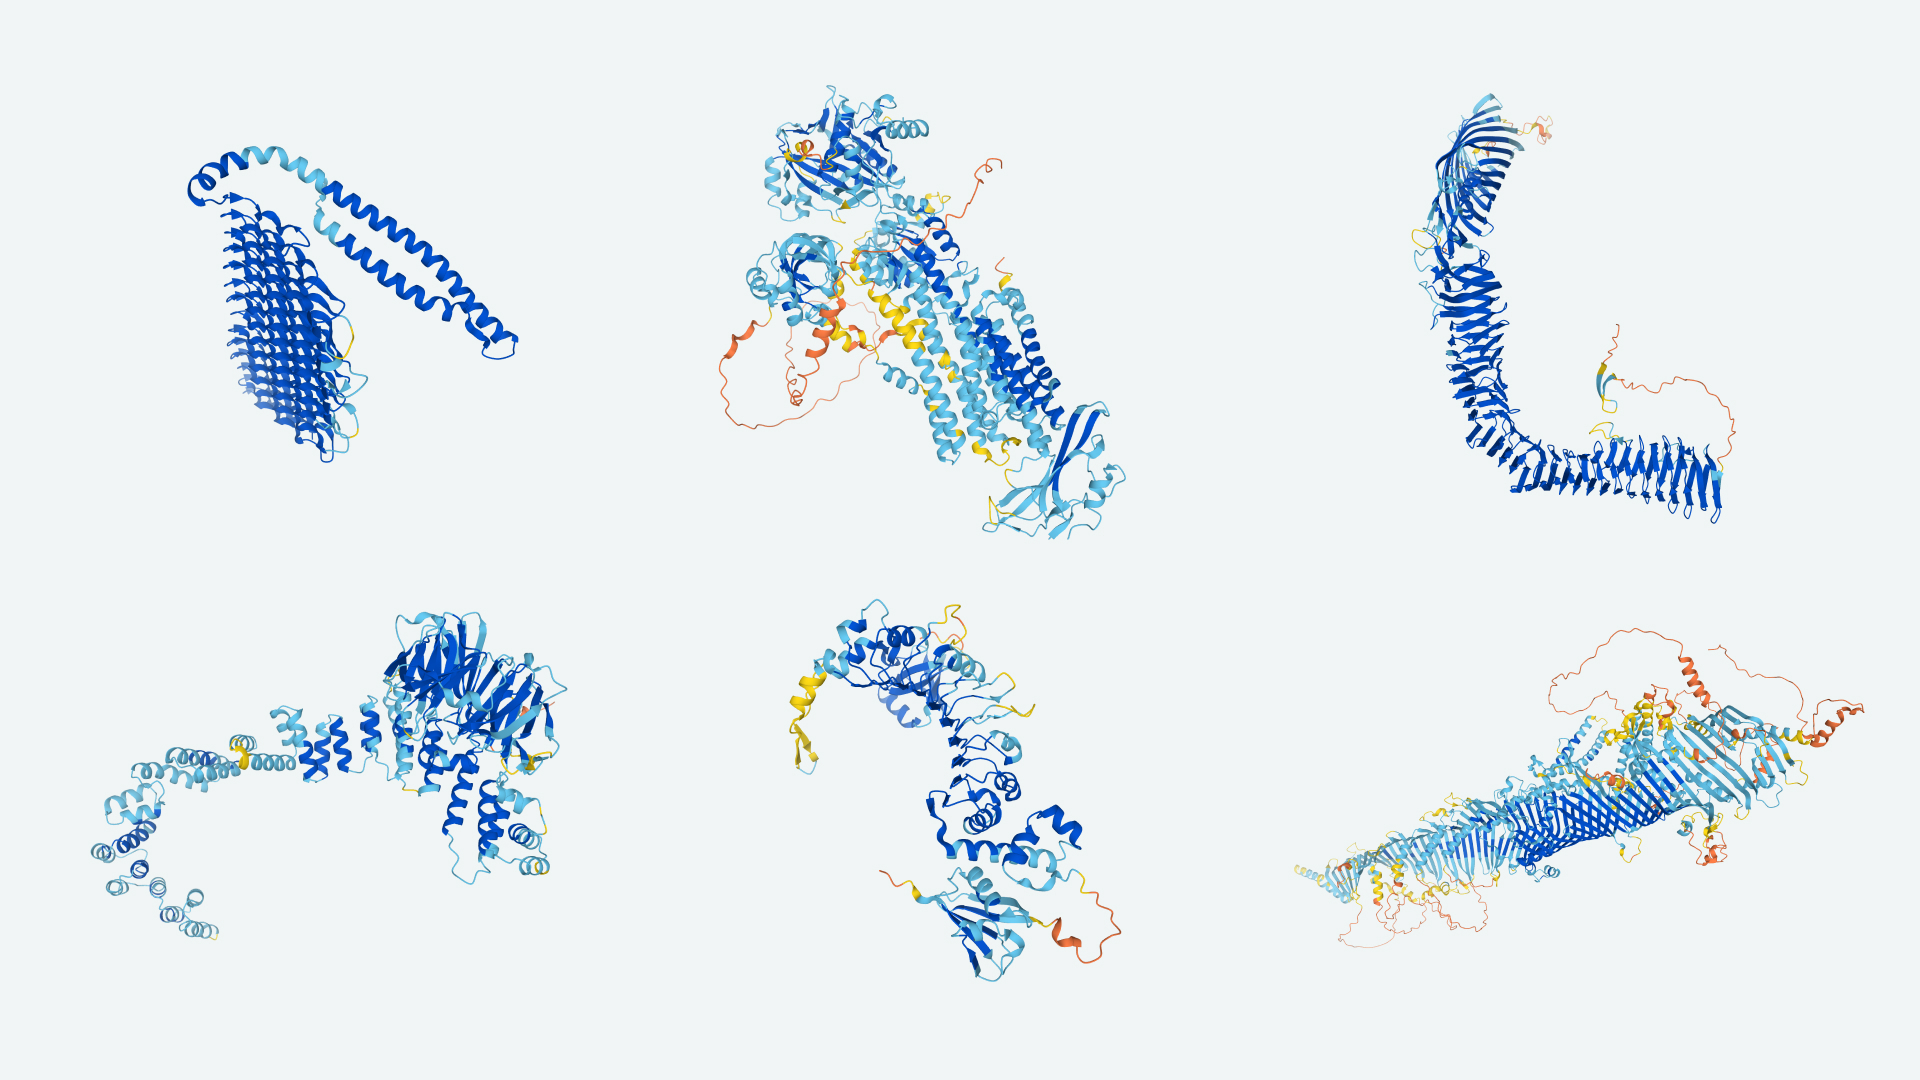 Alphafold from Deepmind has created 3D images of protein structures